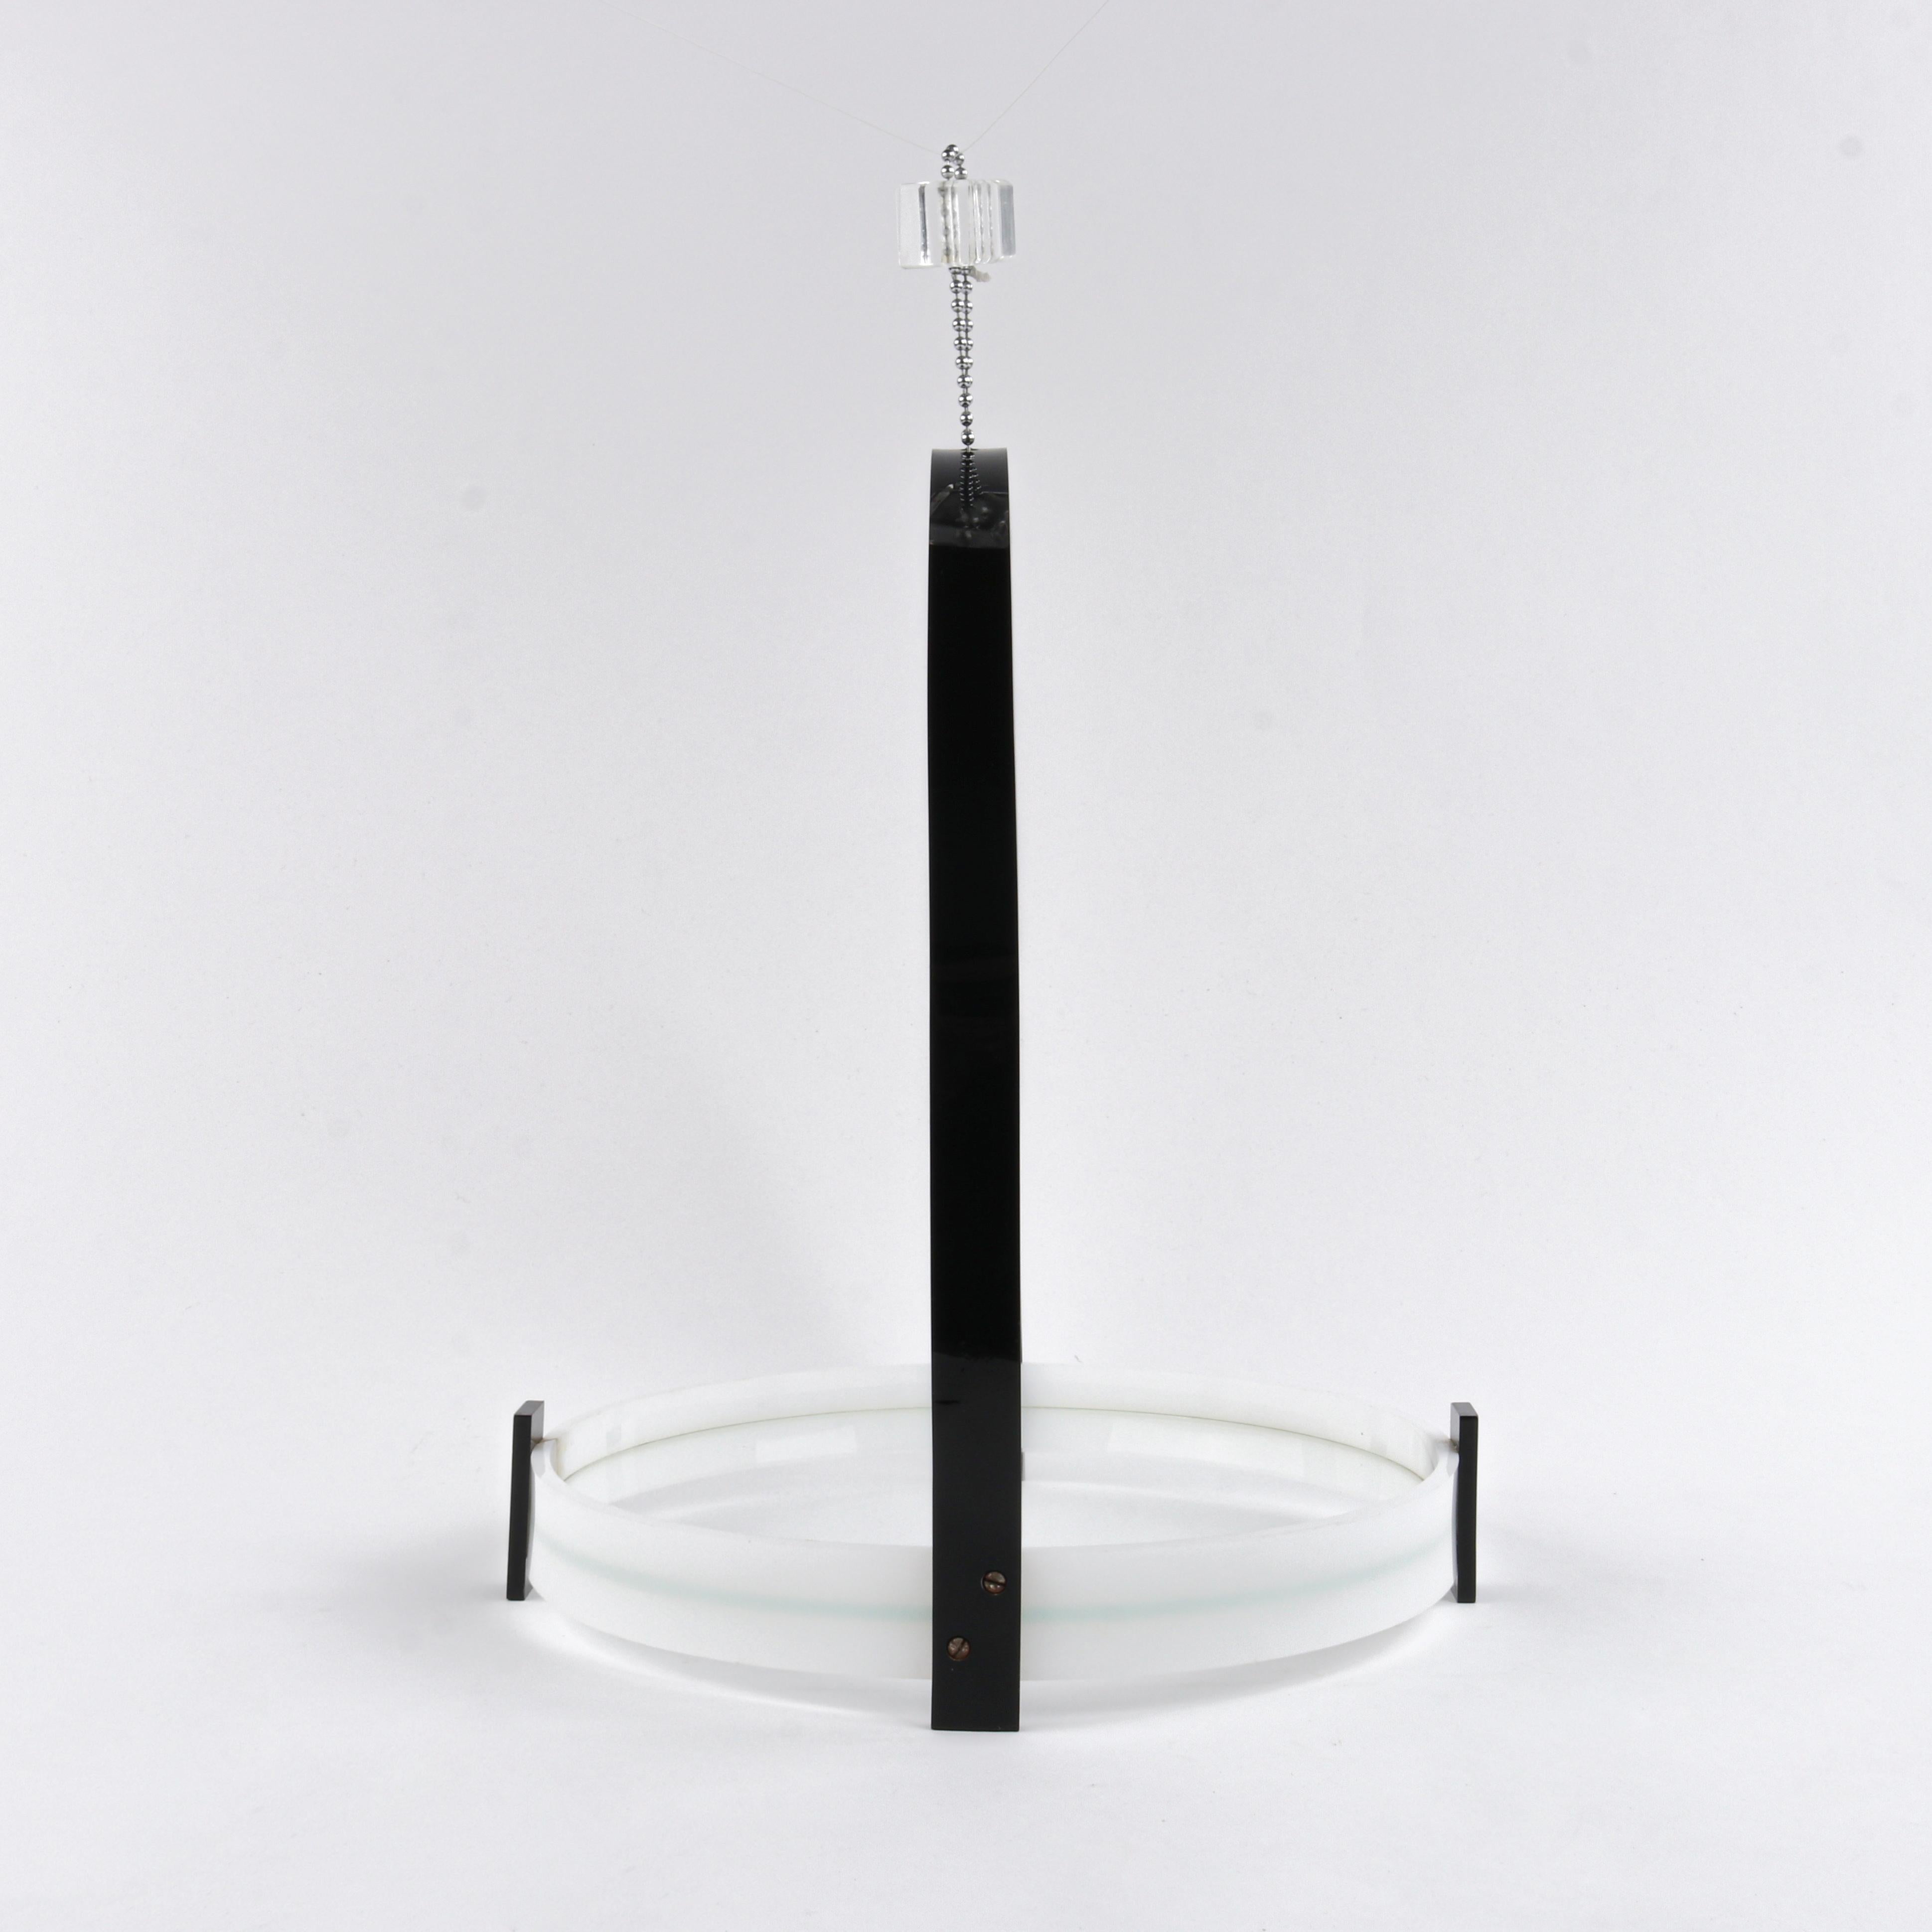 c.1930s-1940s Art Deco Lucite Circular Structured Handheld Serving Beverage Tray For Sale 4